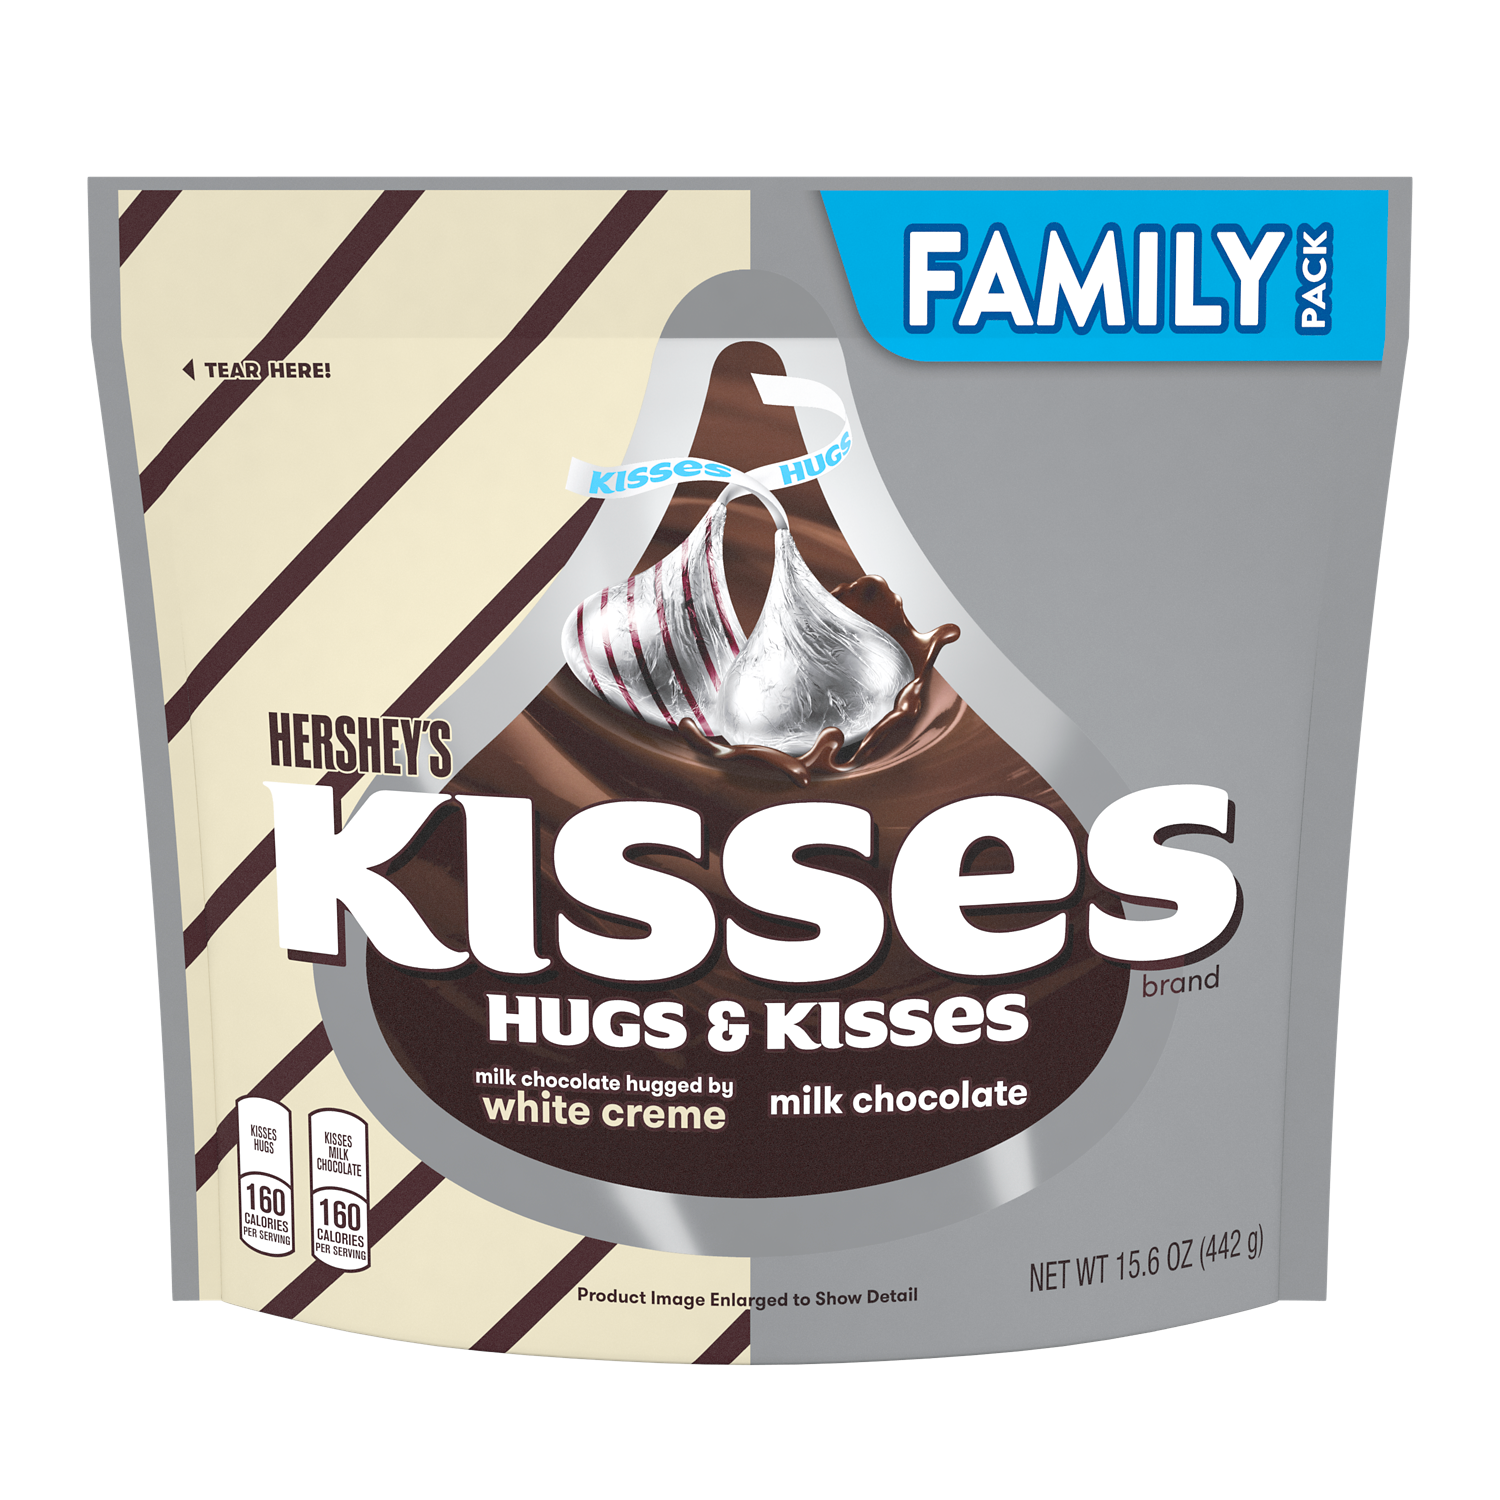 HERSHEY'S HUGS & KISSES Milk Chocolate Assortment, 15.6 oz pack - Front of Package